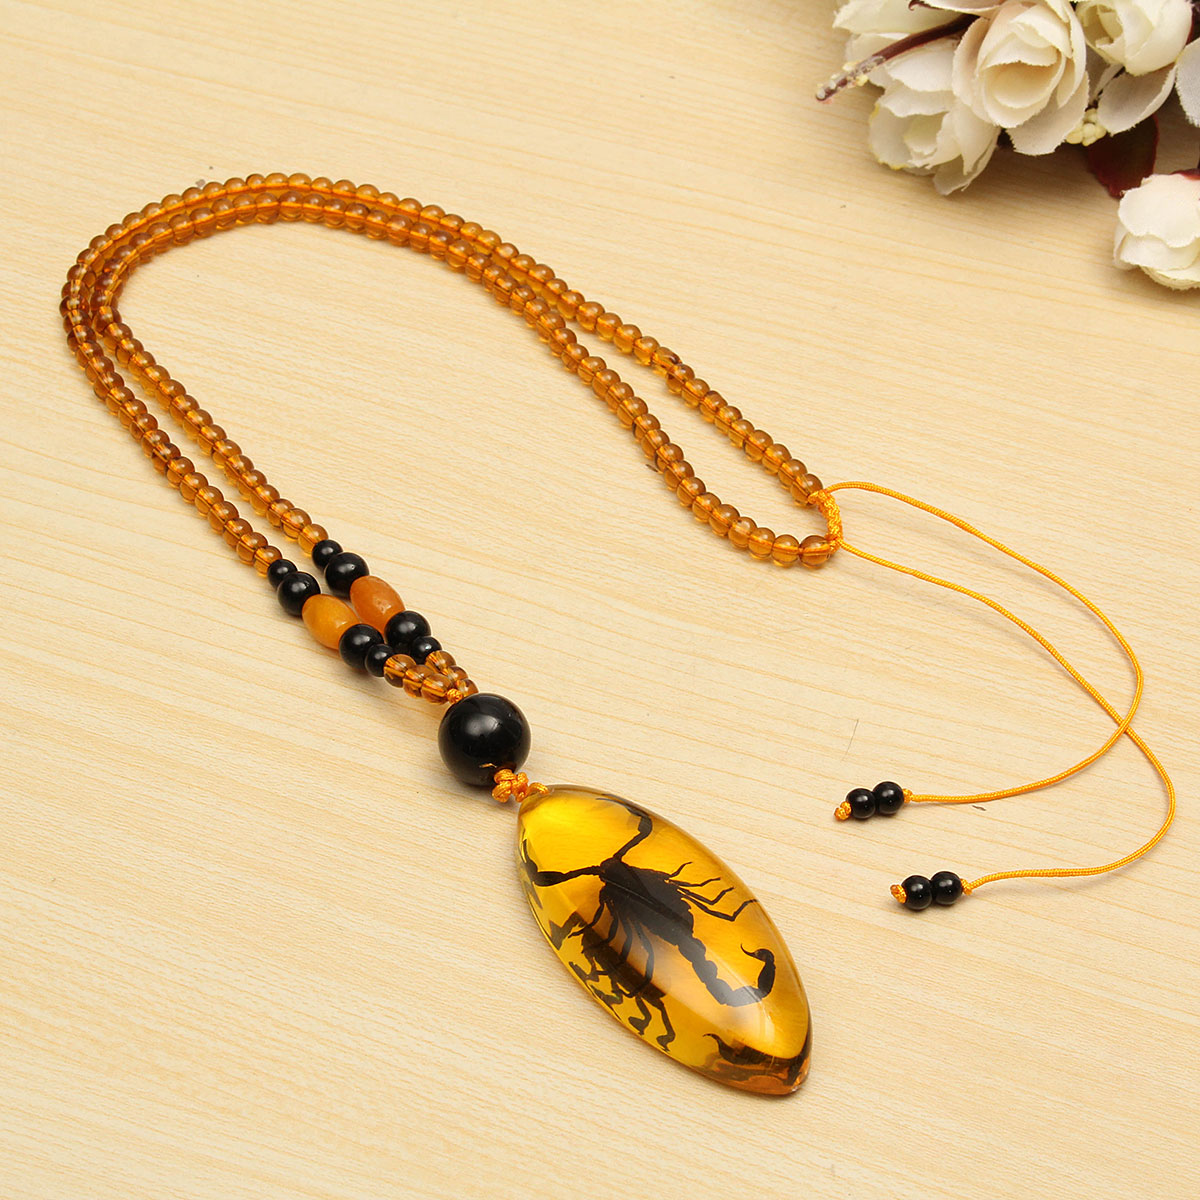 Natural Insects Amber Scorpion Inclusion Pendant Necklace Just $3.23 SHIPPED!